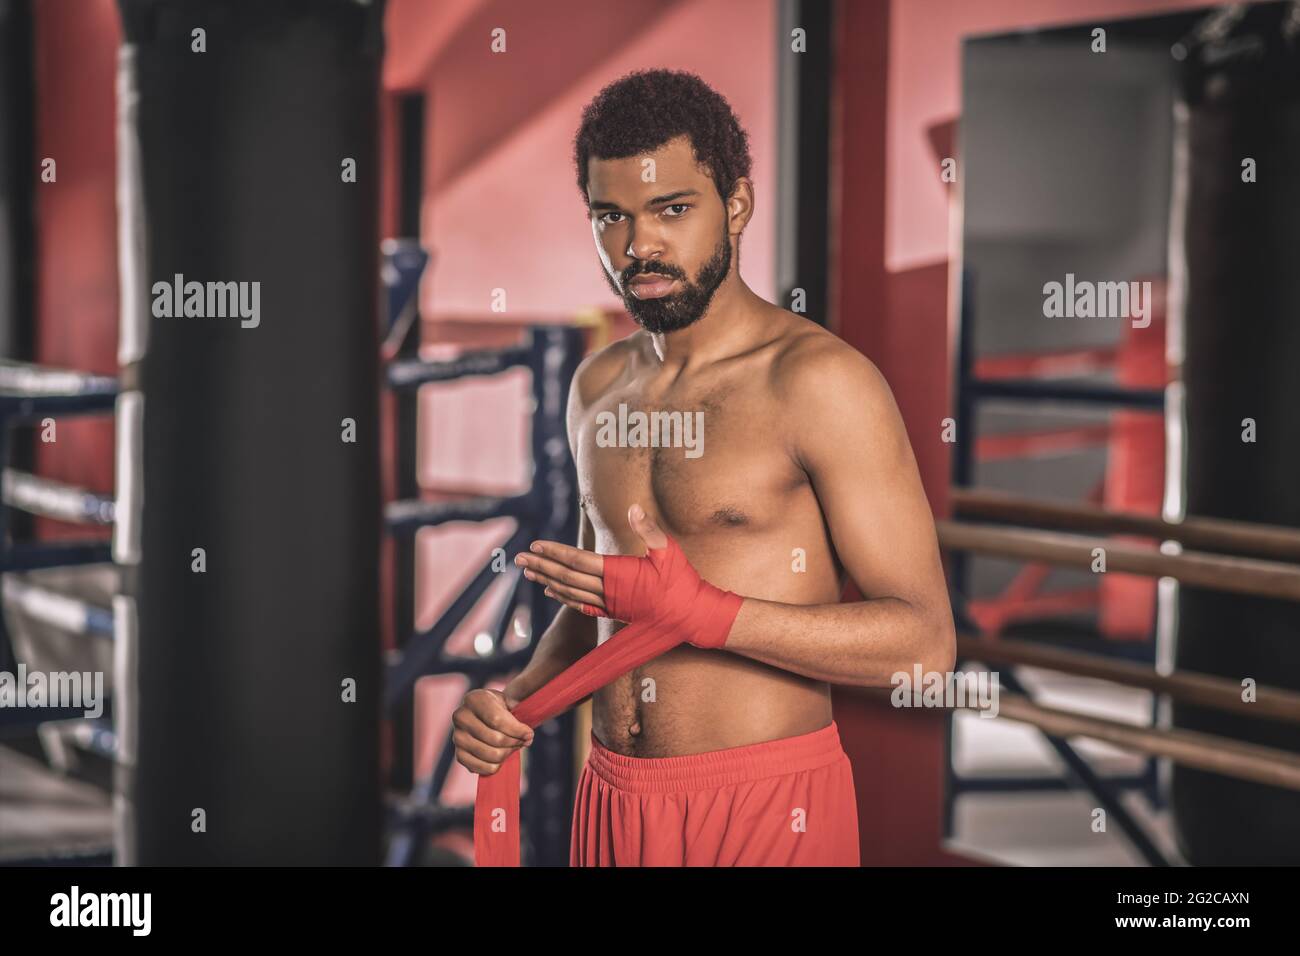 African american kickboxer typing a bandage on his hand before the workout Stock Photo